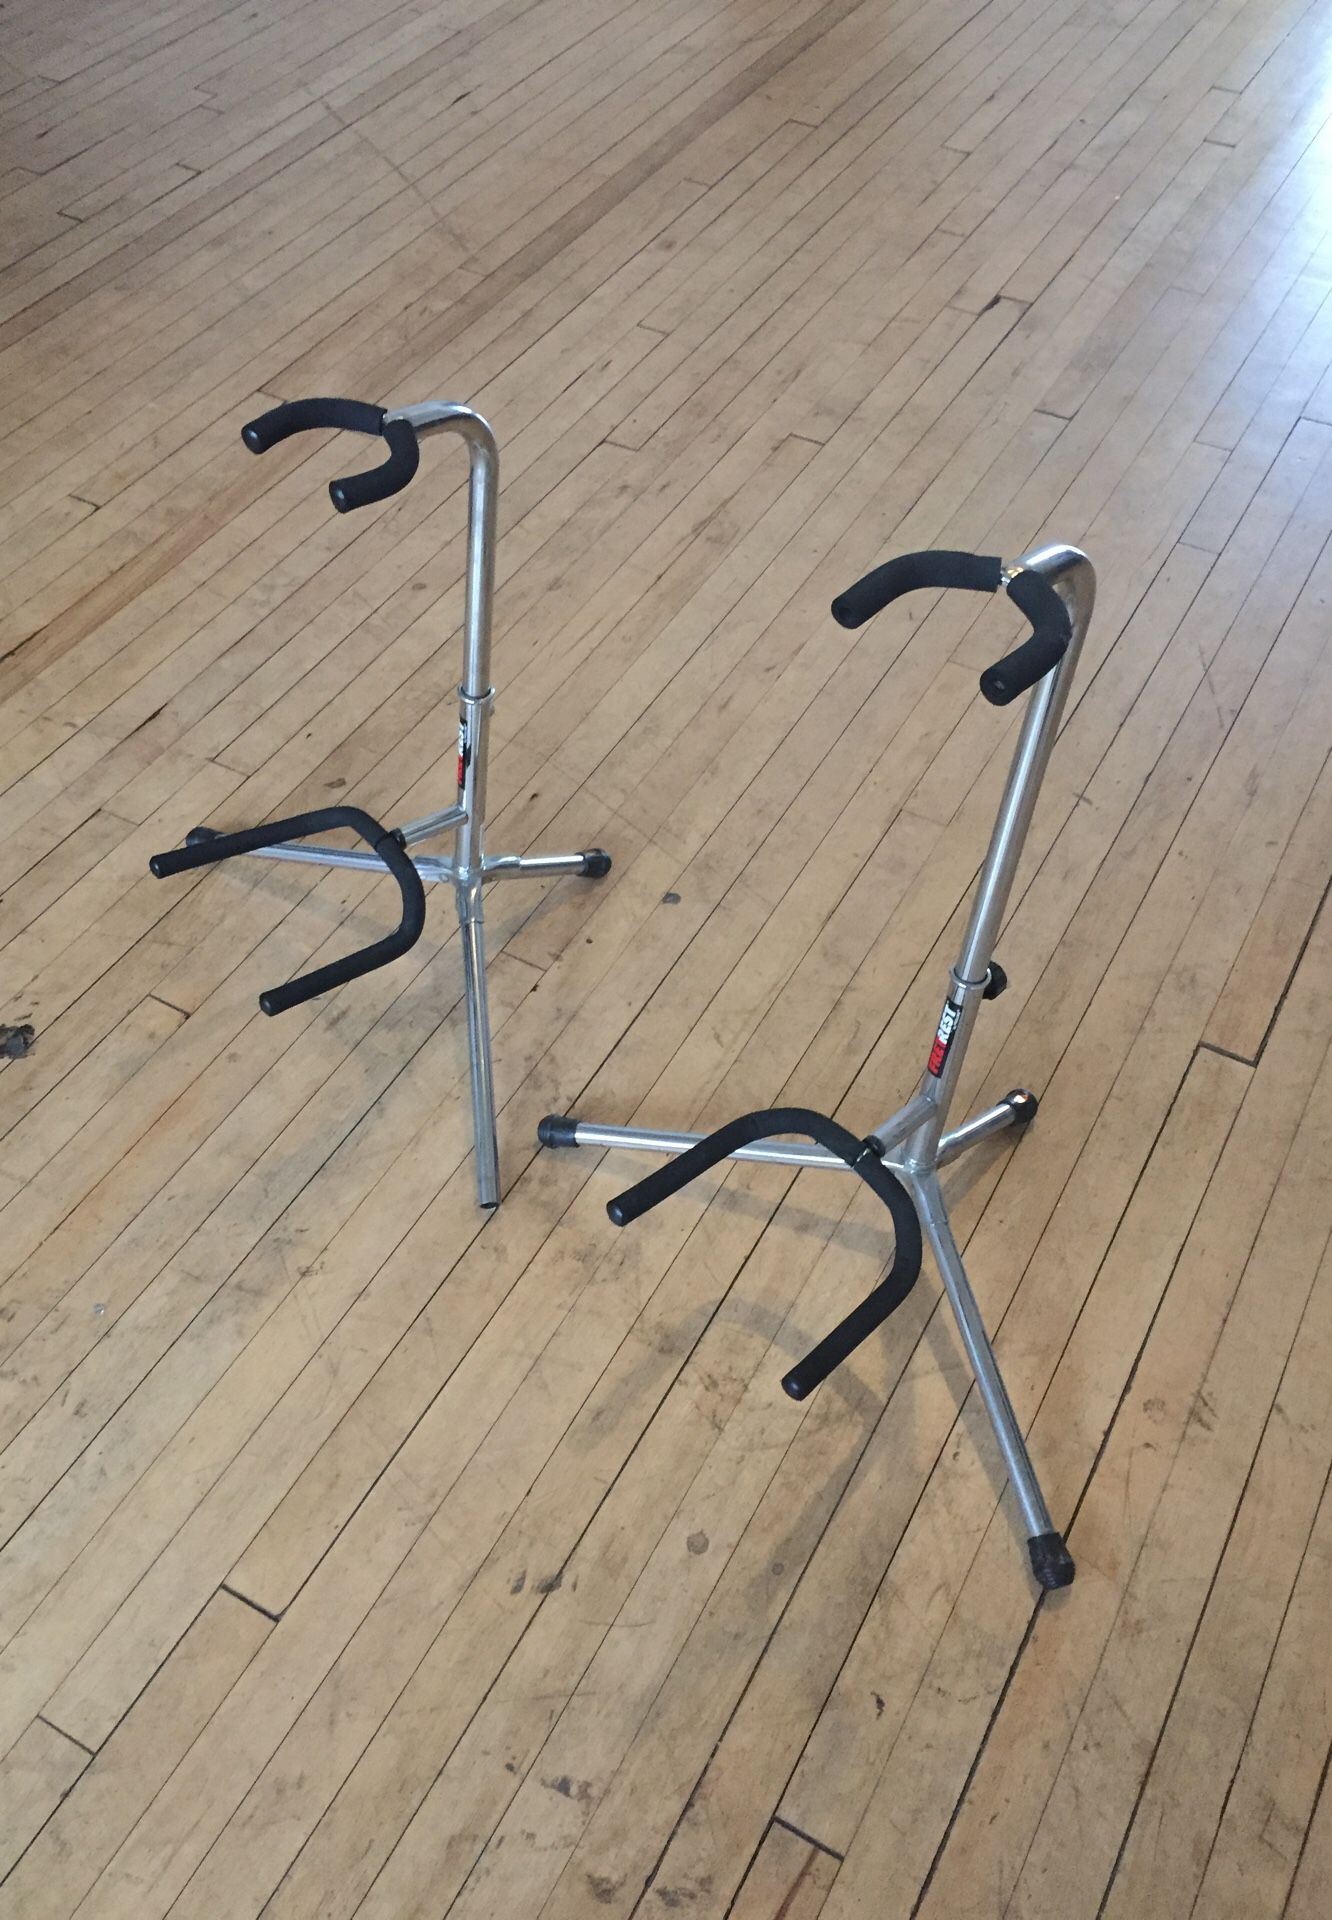 Two Fret rest guitar stands